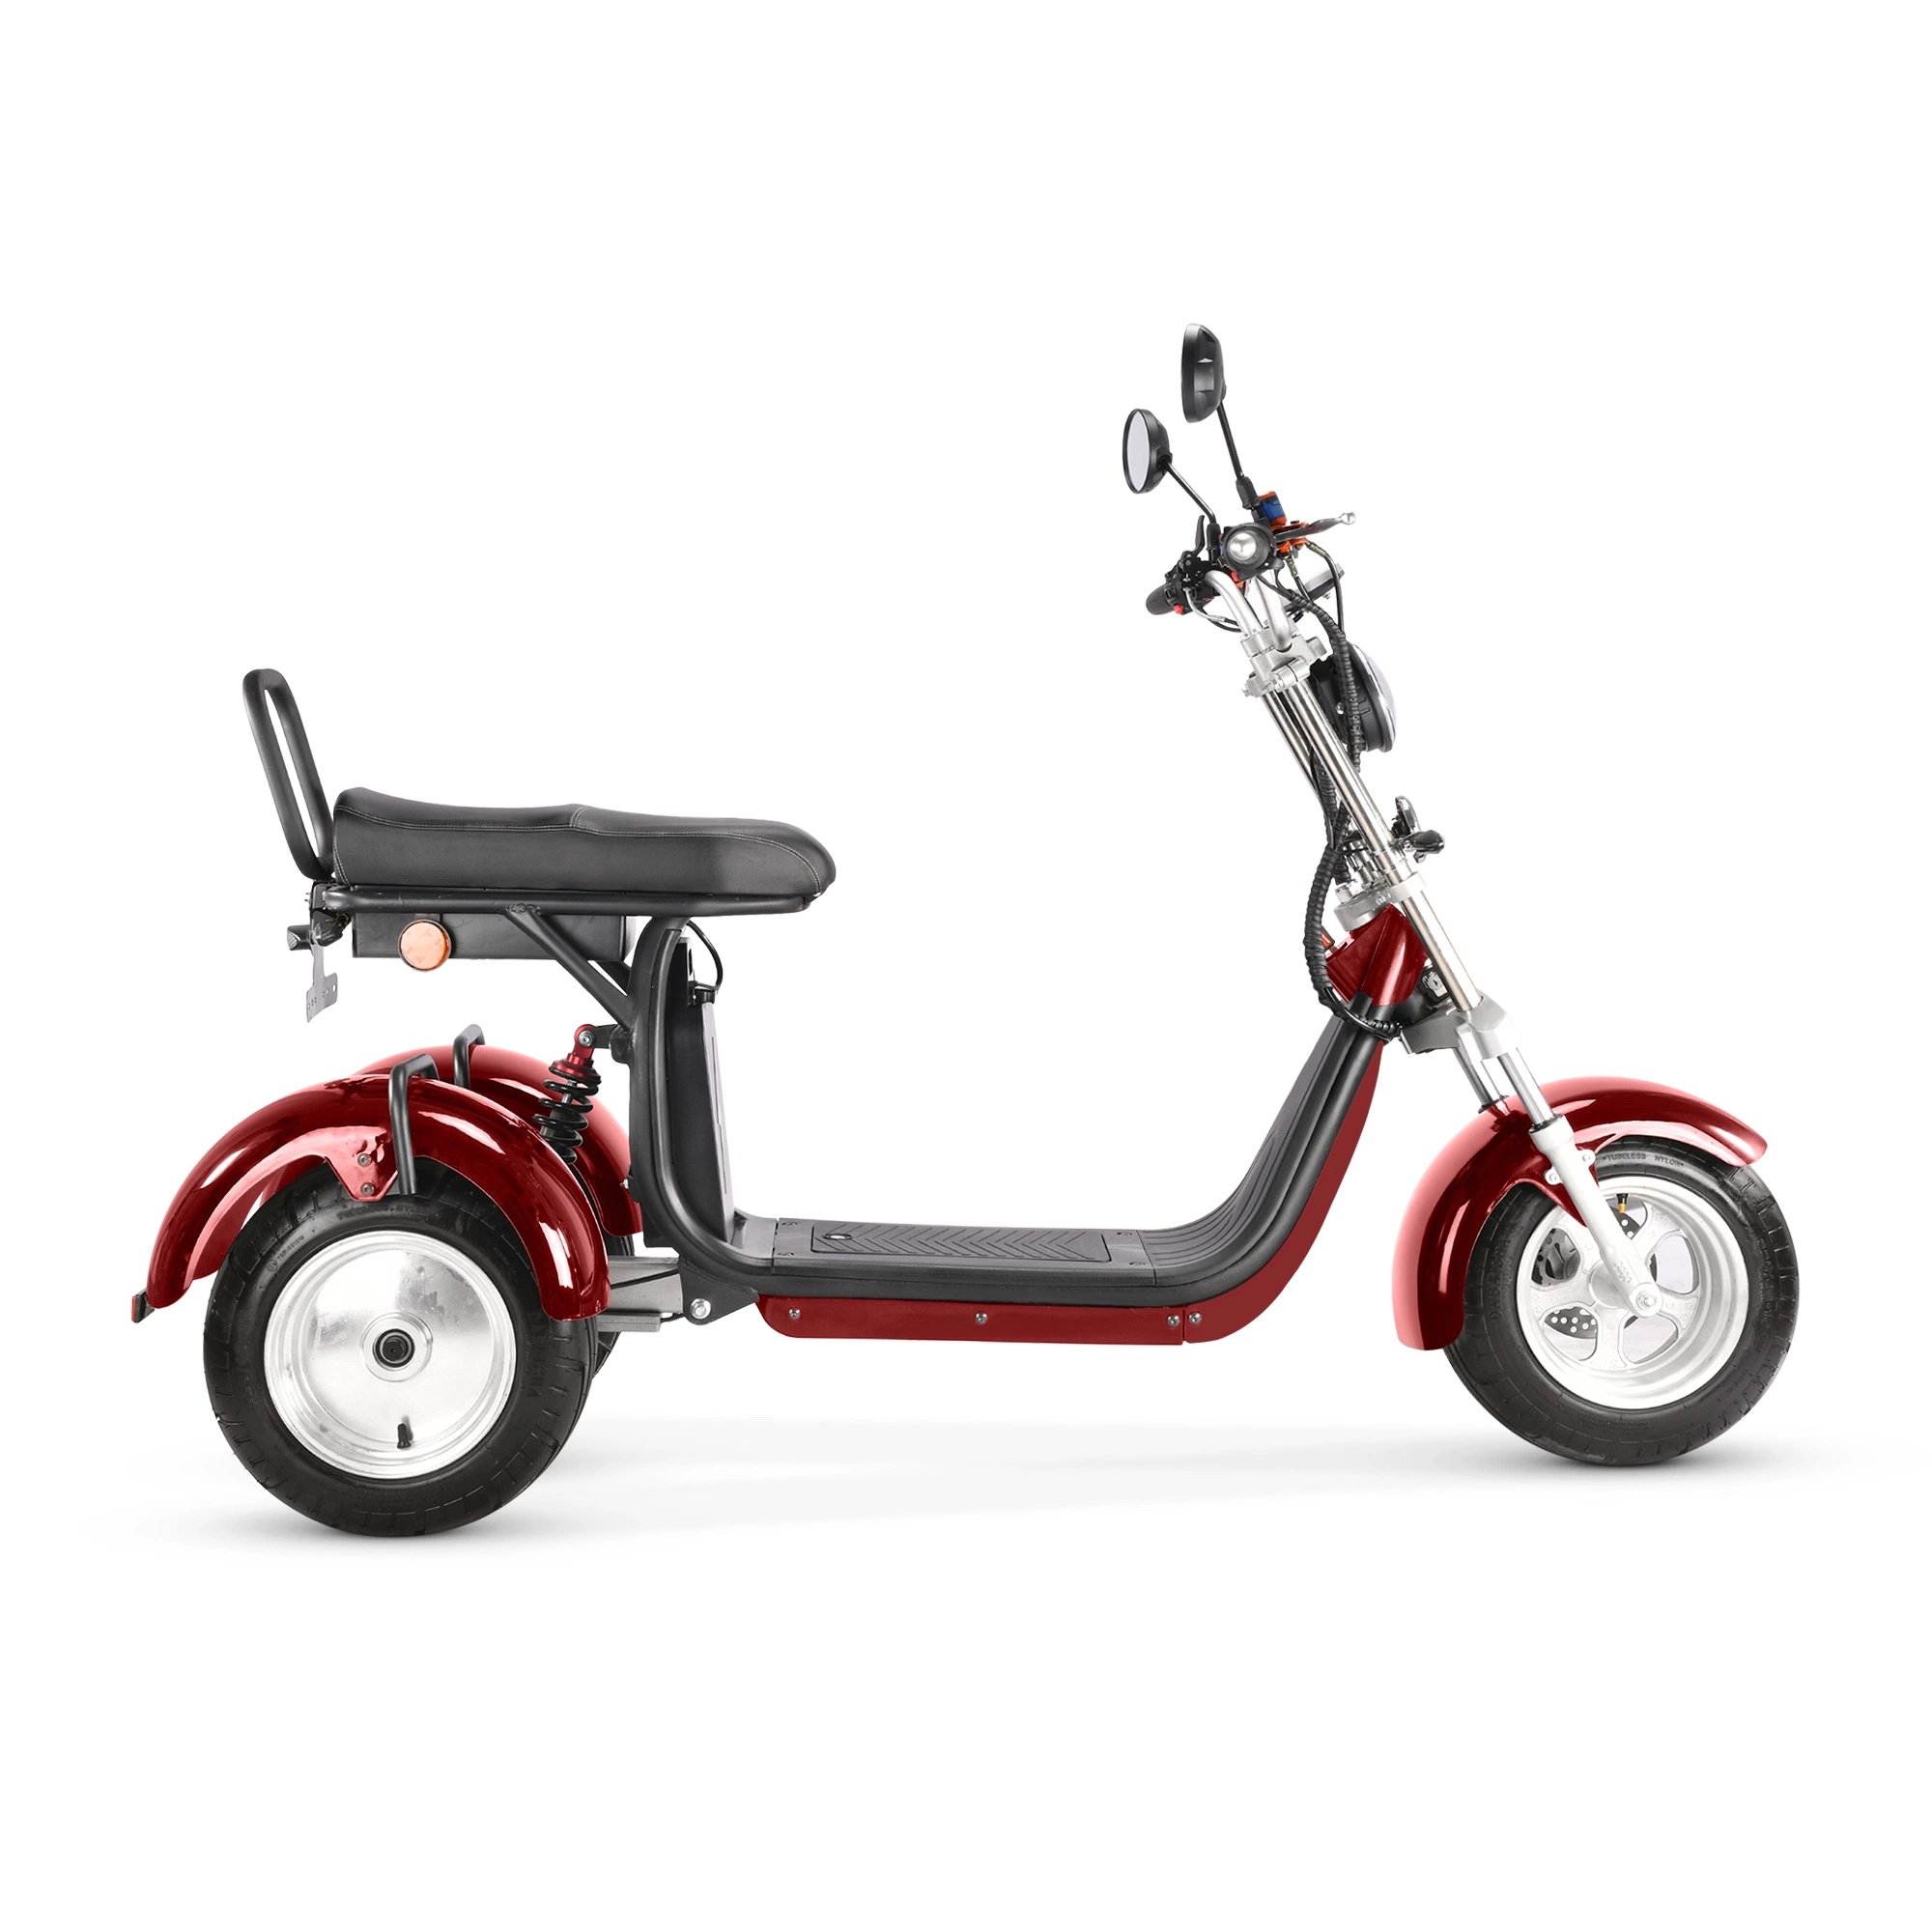 Three Wheels Big Tire Trike Adult Tricycle Citycoco 3 Wheel Electric Scooter 1500W 2000W EEC Certificate